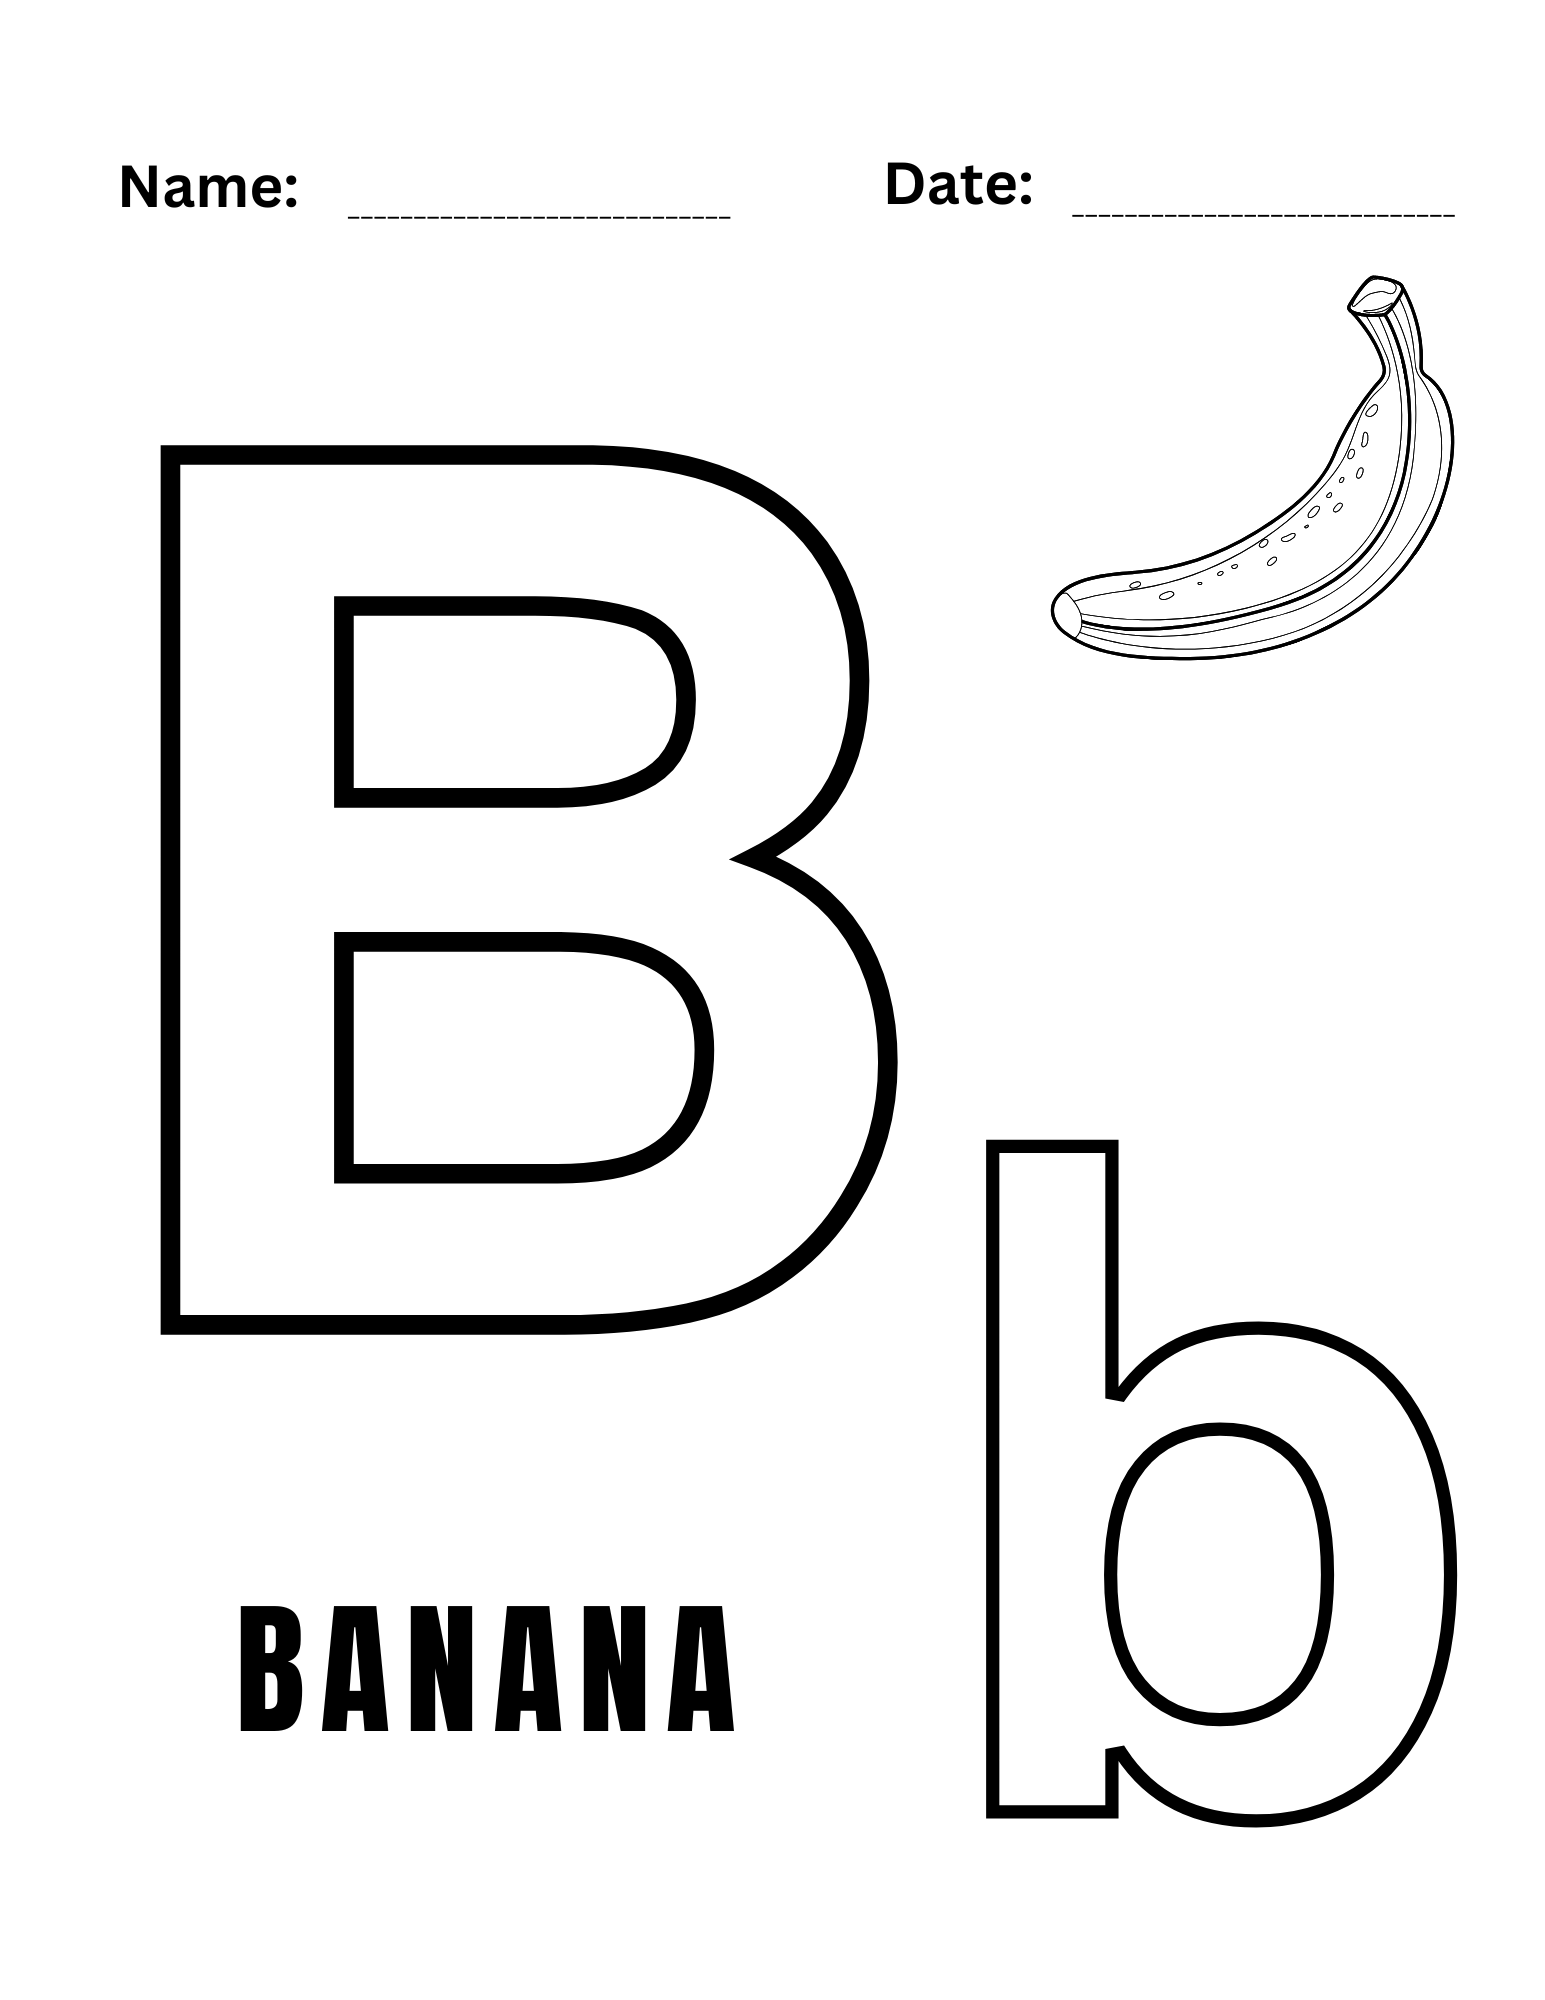 A cute banan surrounded by vibrant colors on an alphabet coloring page.